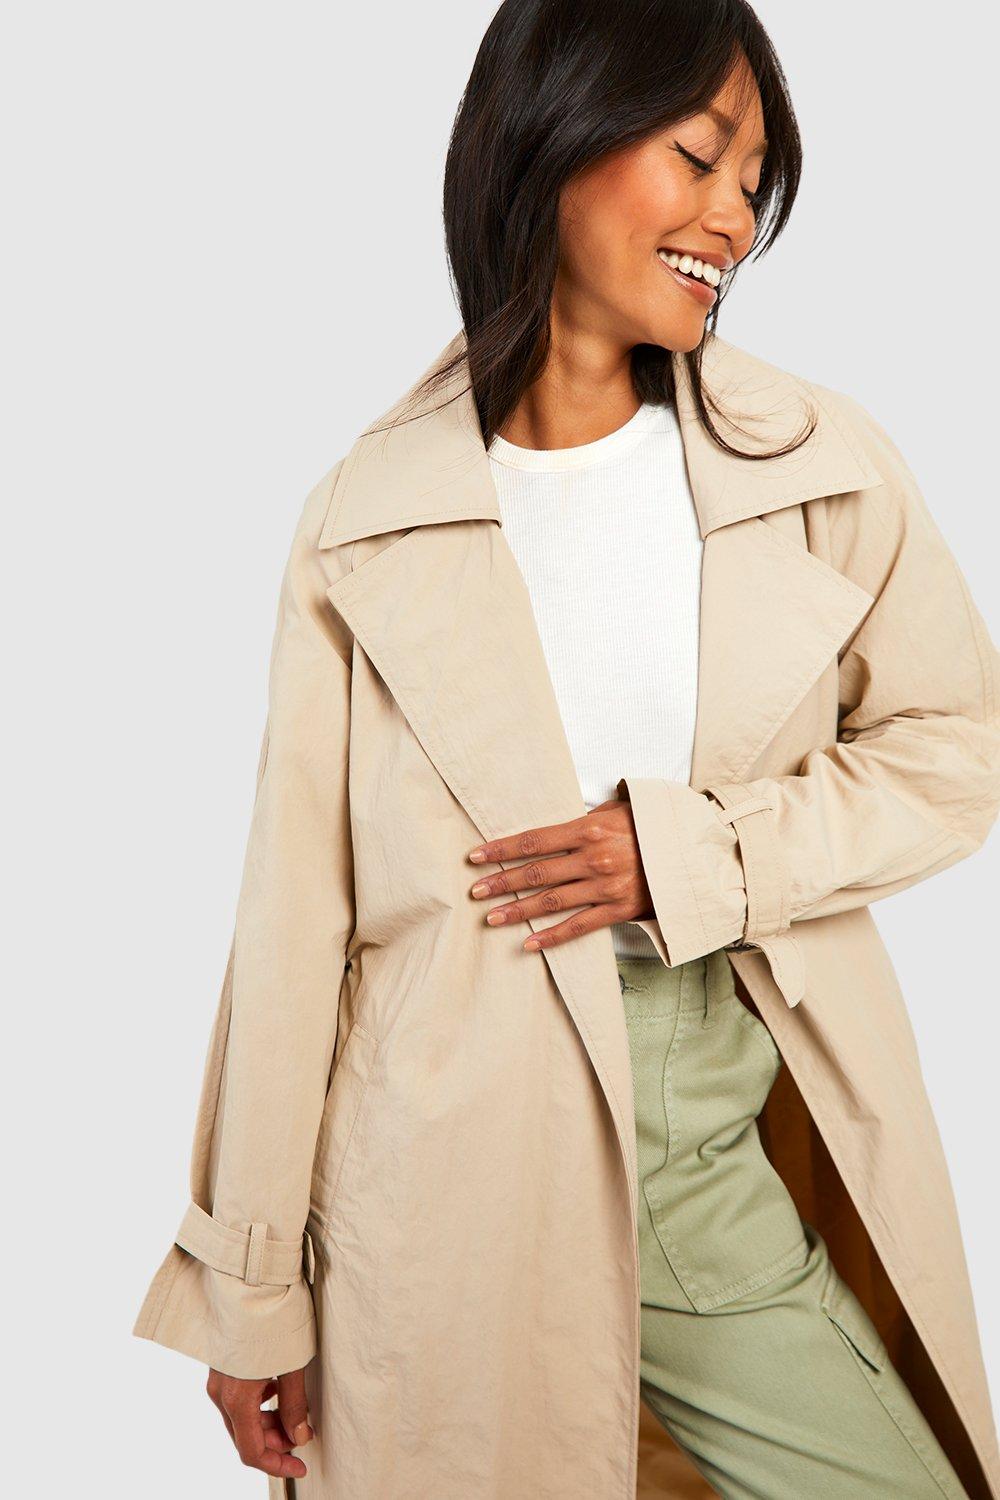 Boohoo Belted Trench Coat